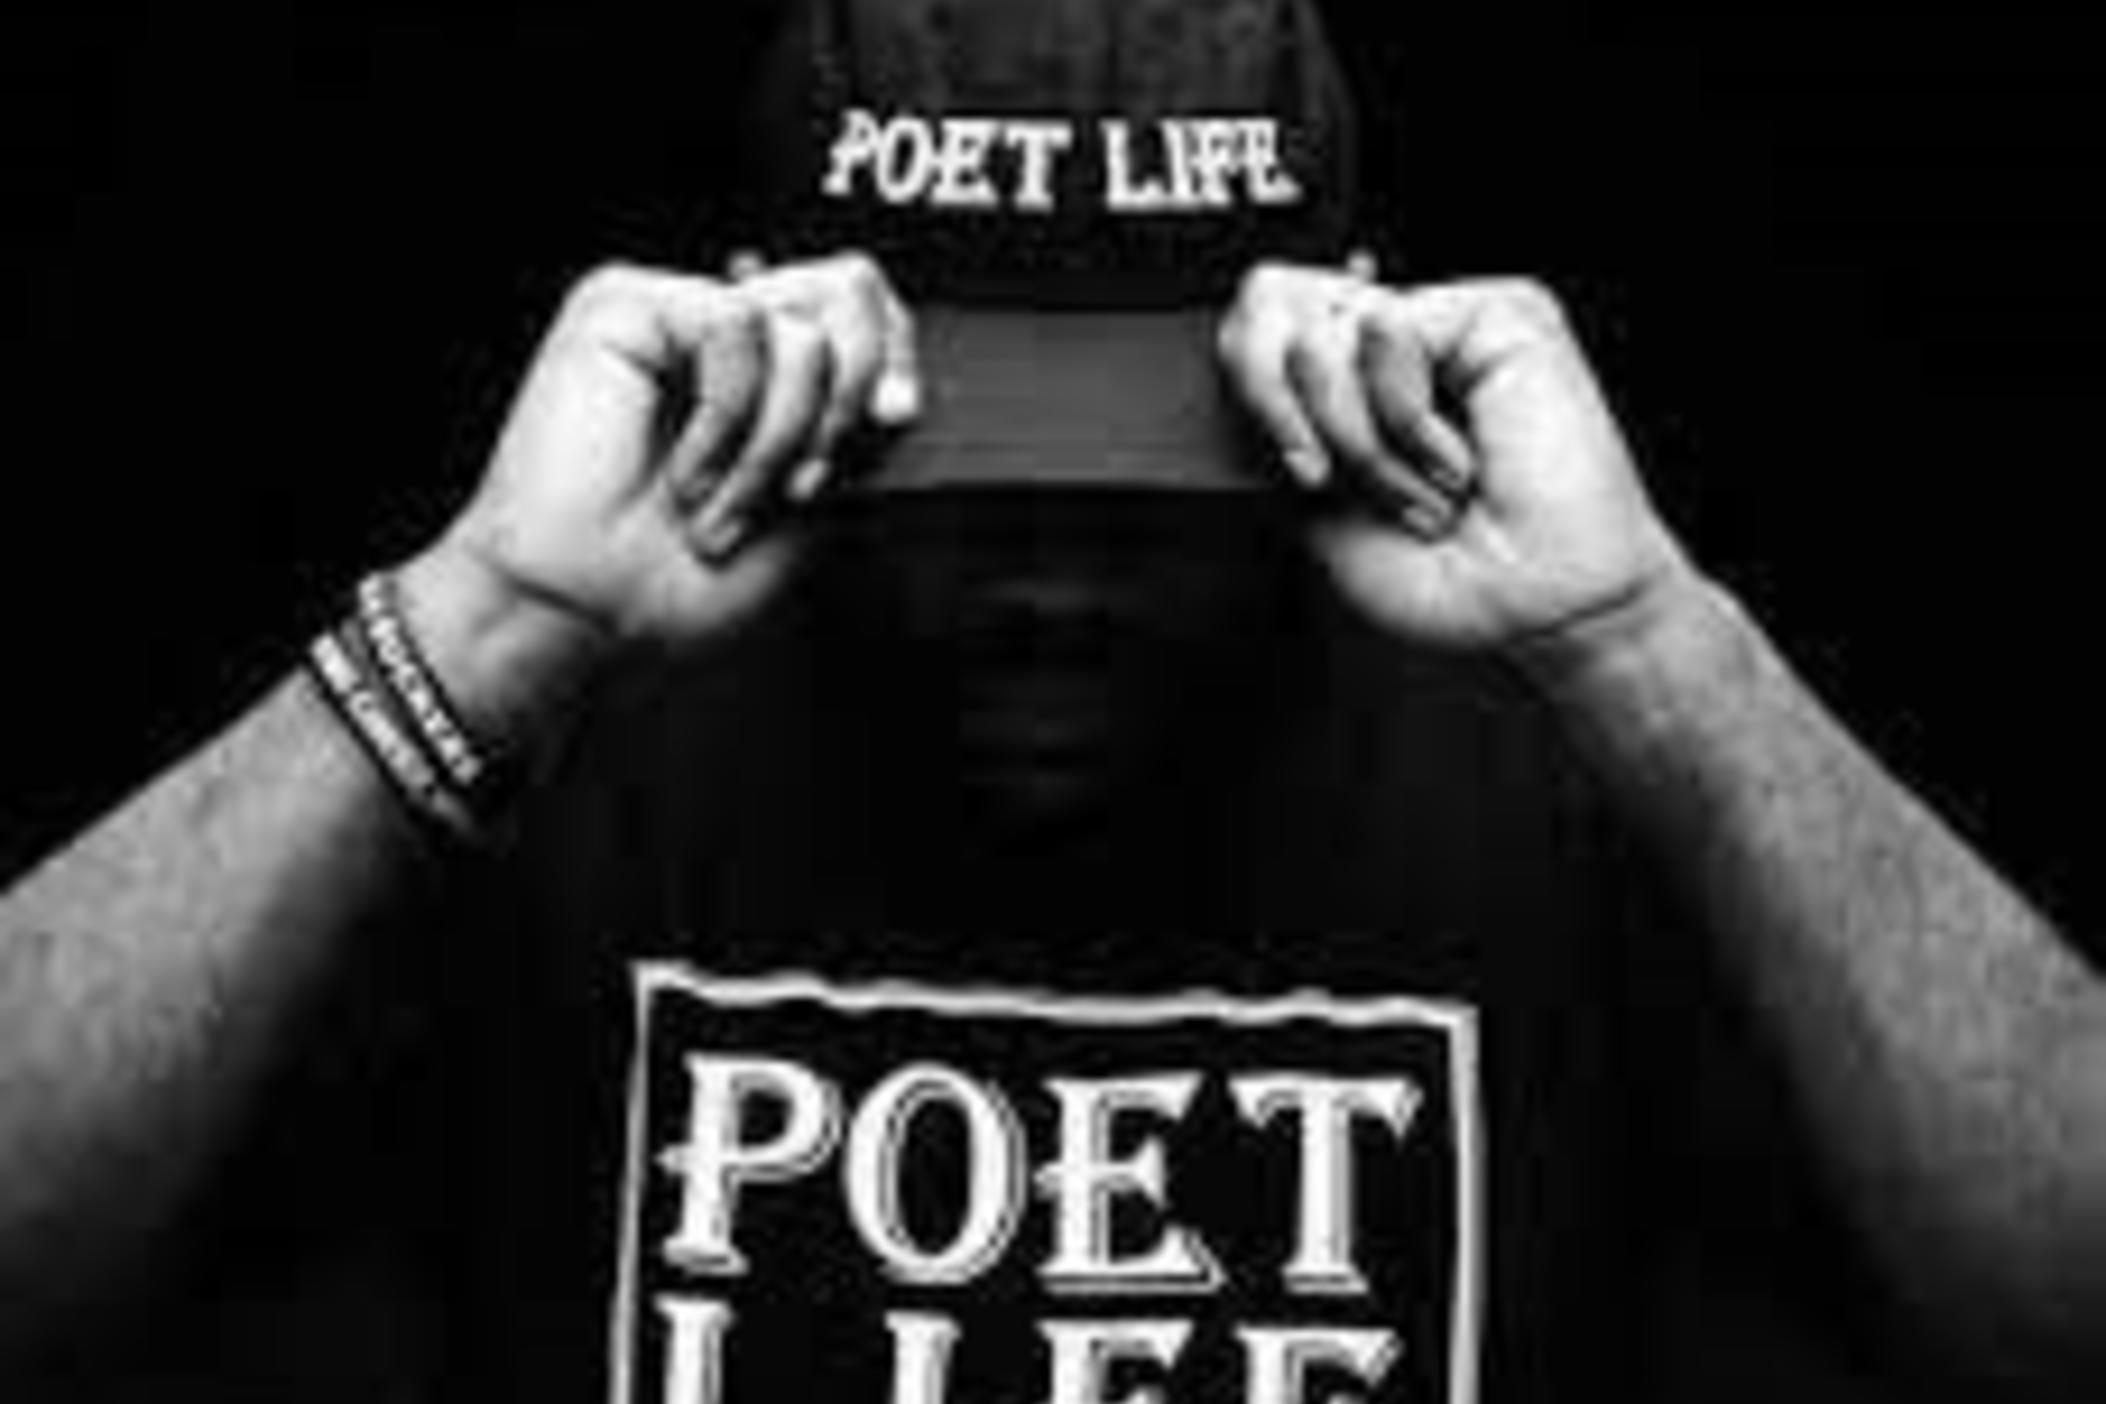 The Poet Life helps teens find their voice using poetry